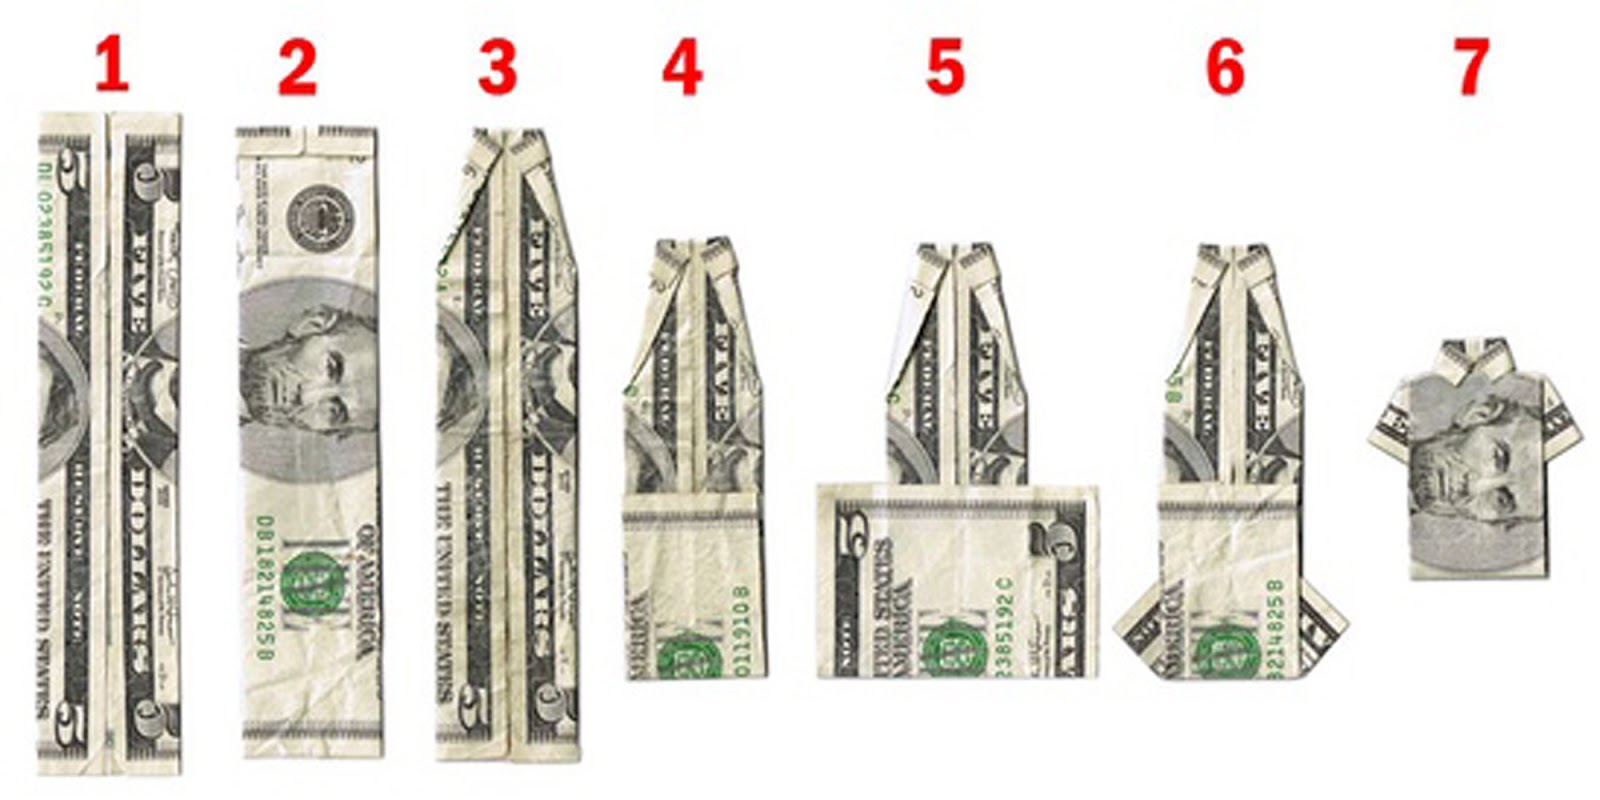 how to make a paper crane out of money